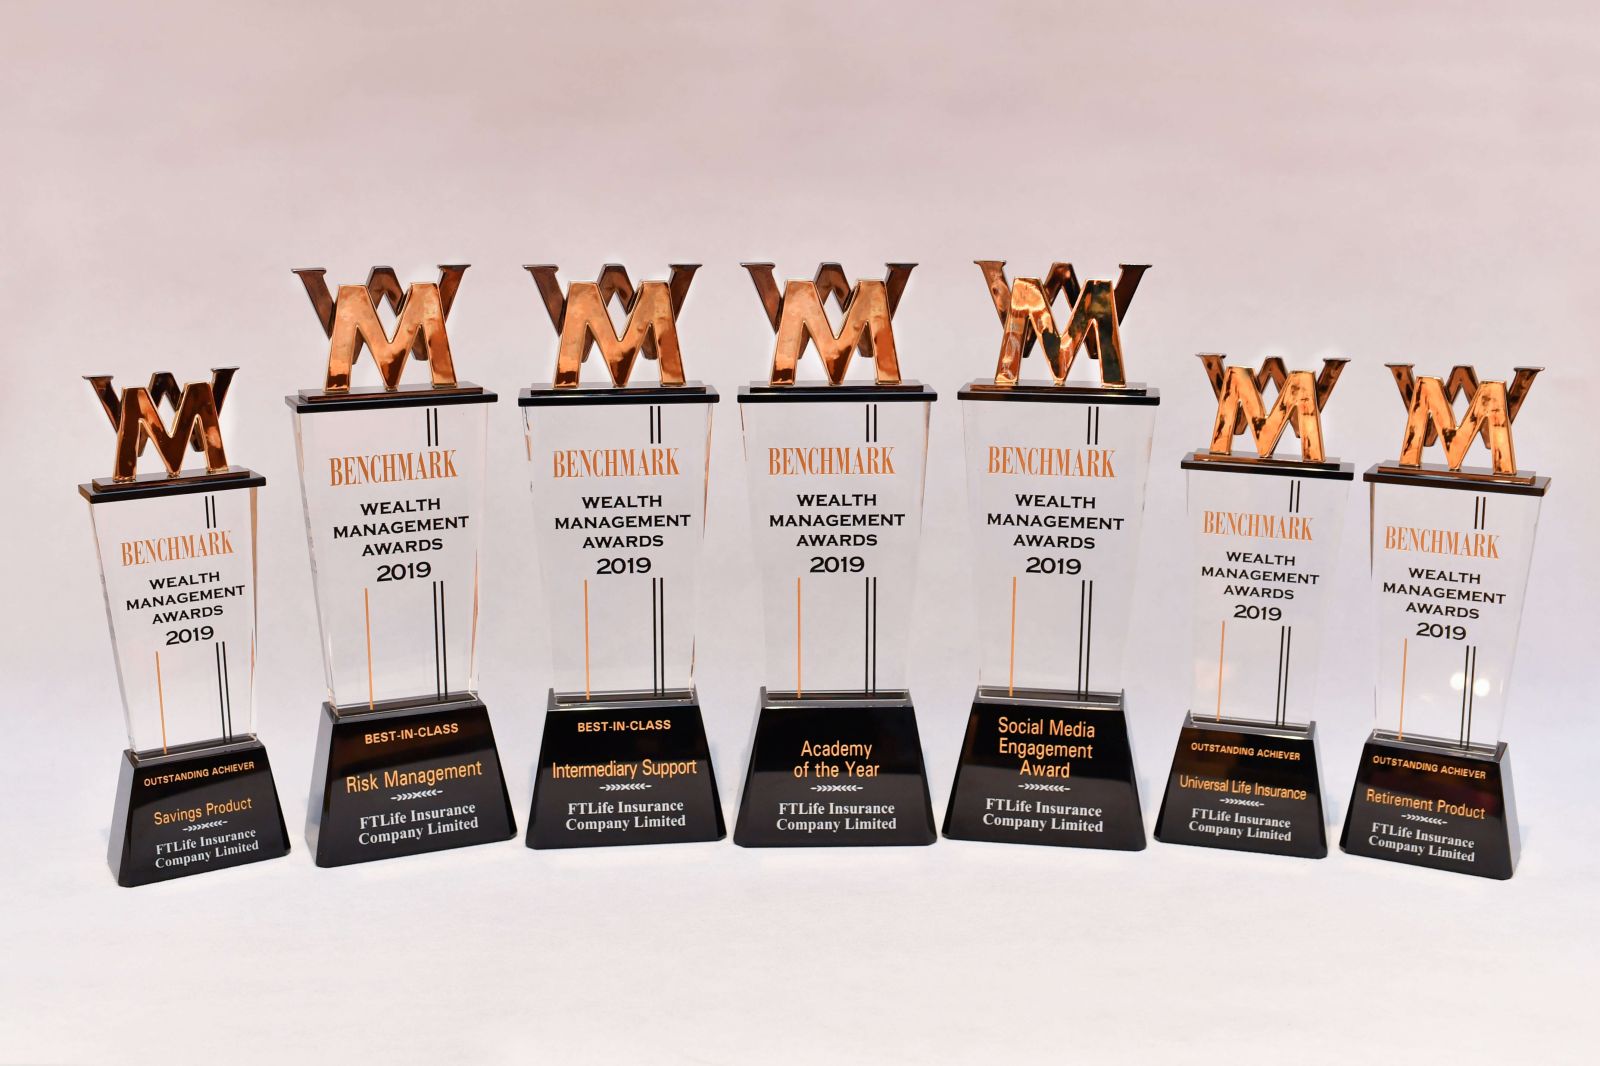 FTLife won 7 awards at the 10th Annual BENCHMARK Wealth Management Awards